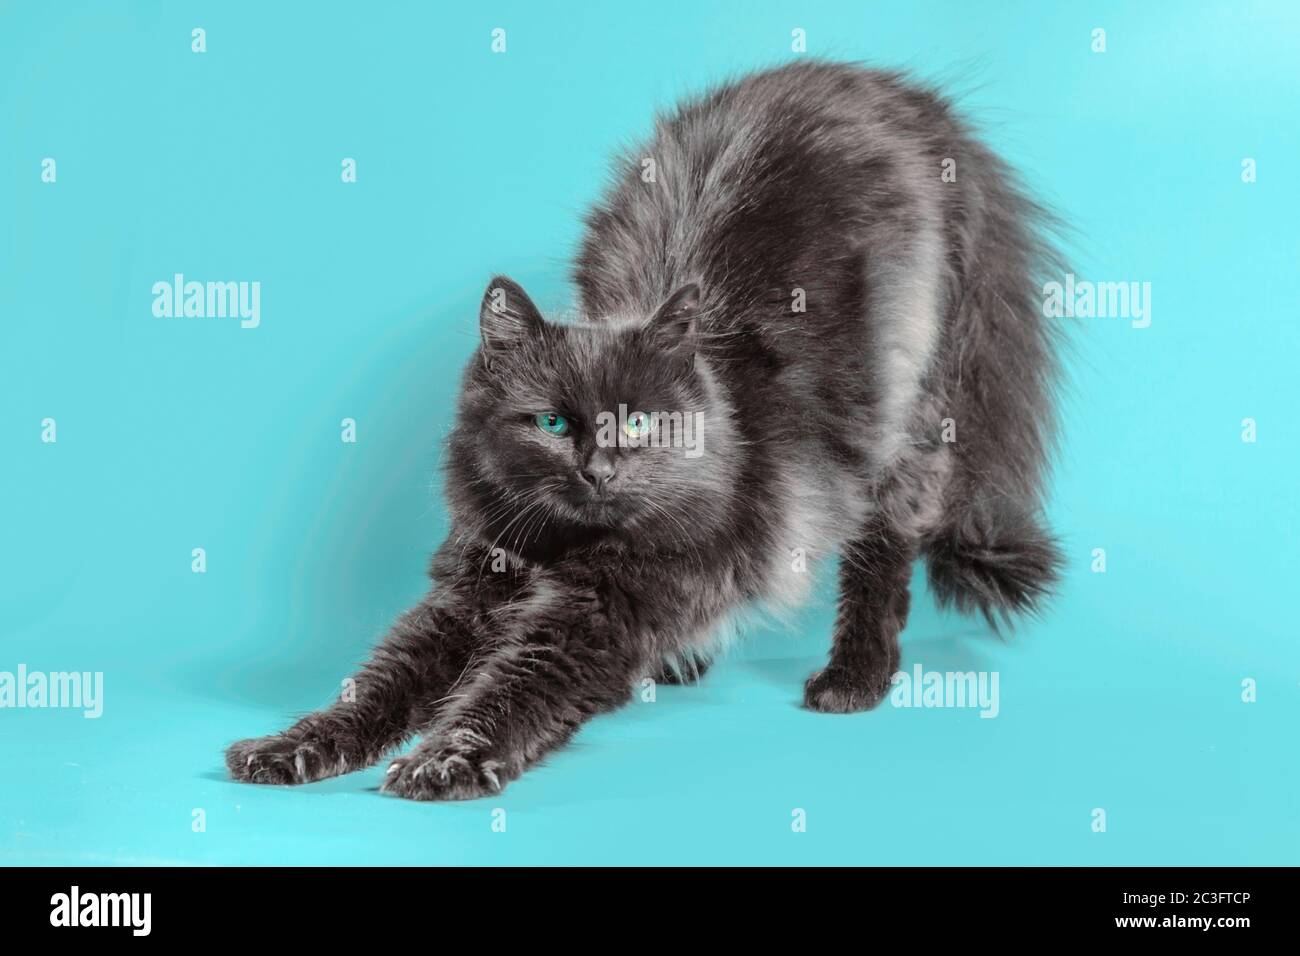 black cat stretches on a turquoise background Stock Photo